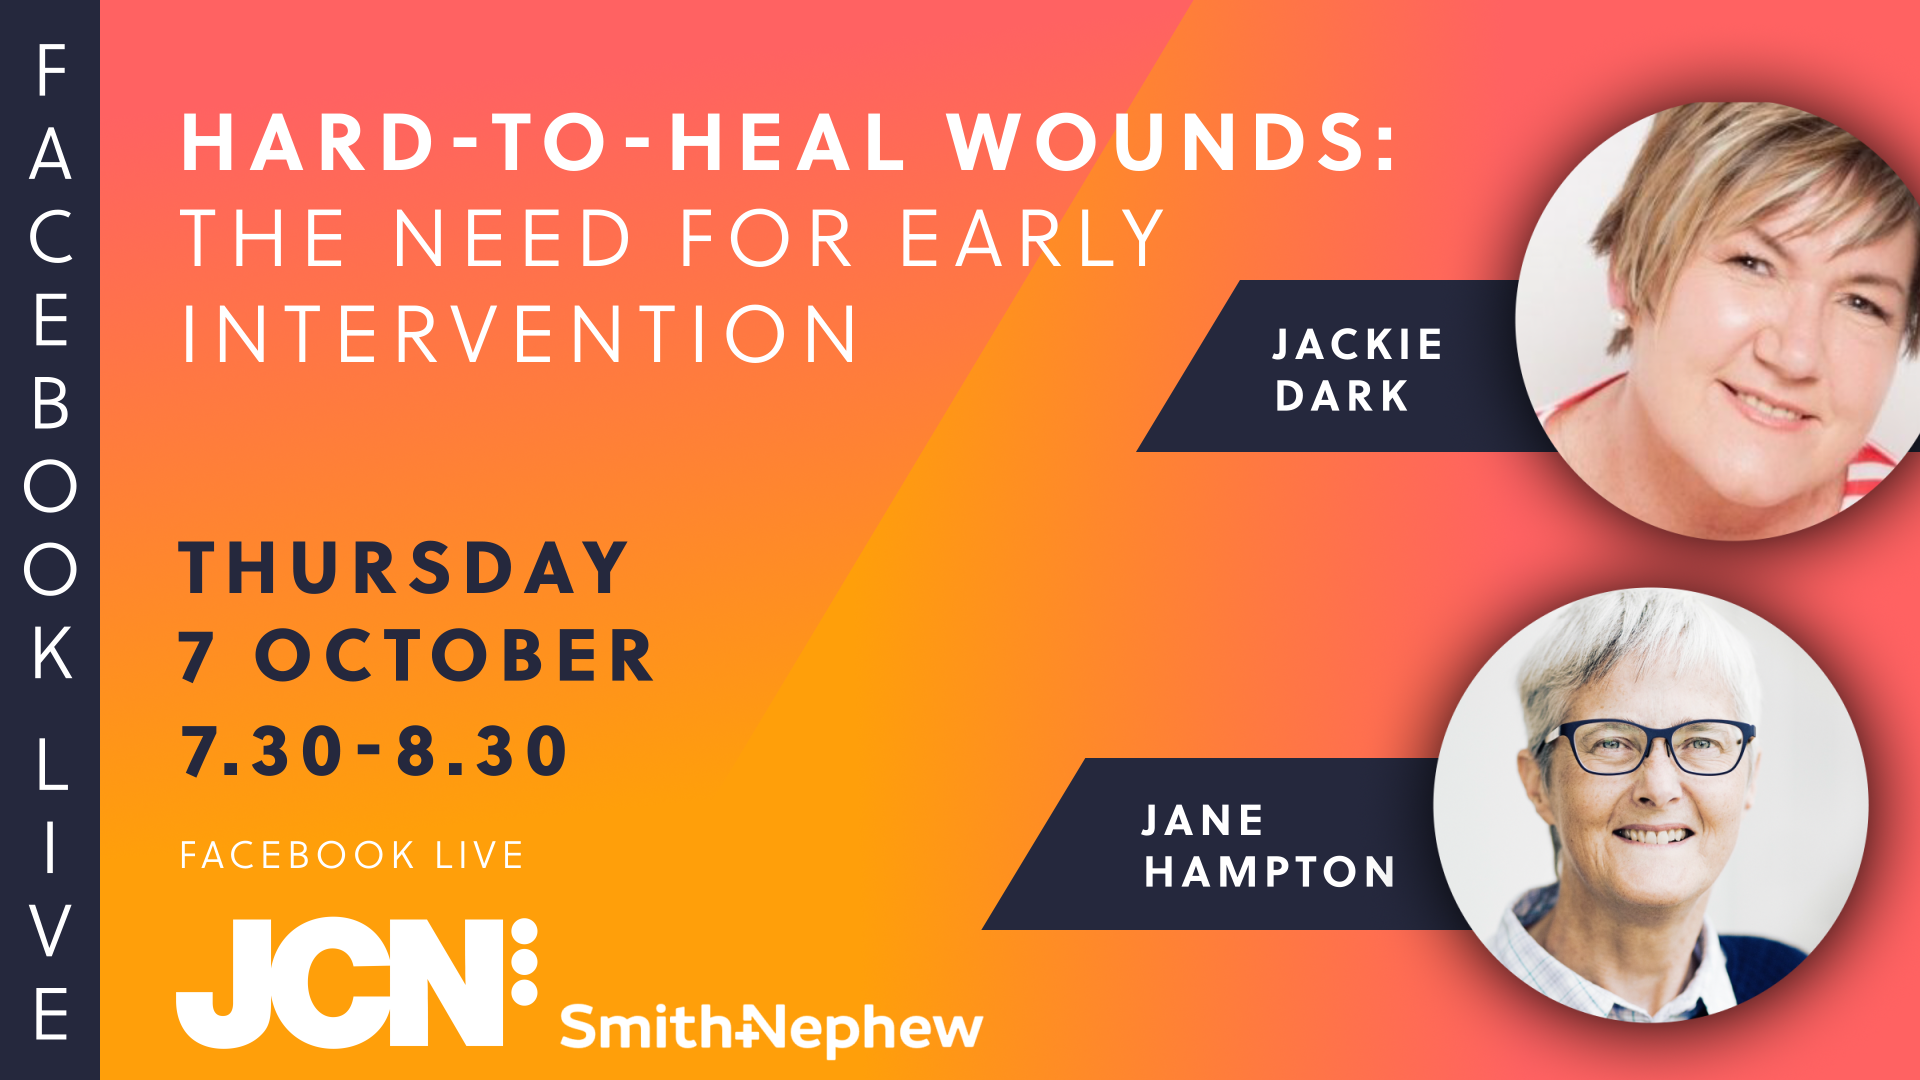 Facebook Live: Hard-to-heal wounds: the need for early intervention